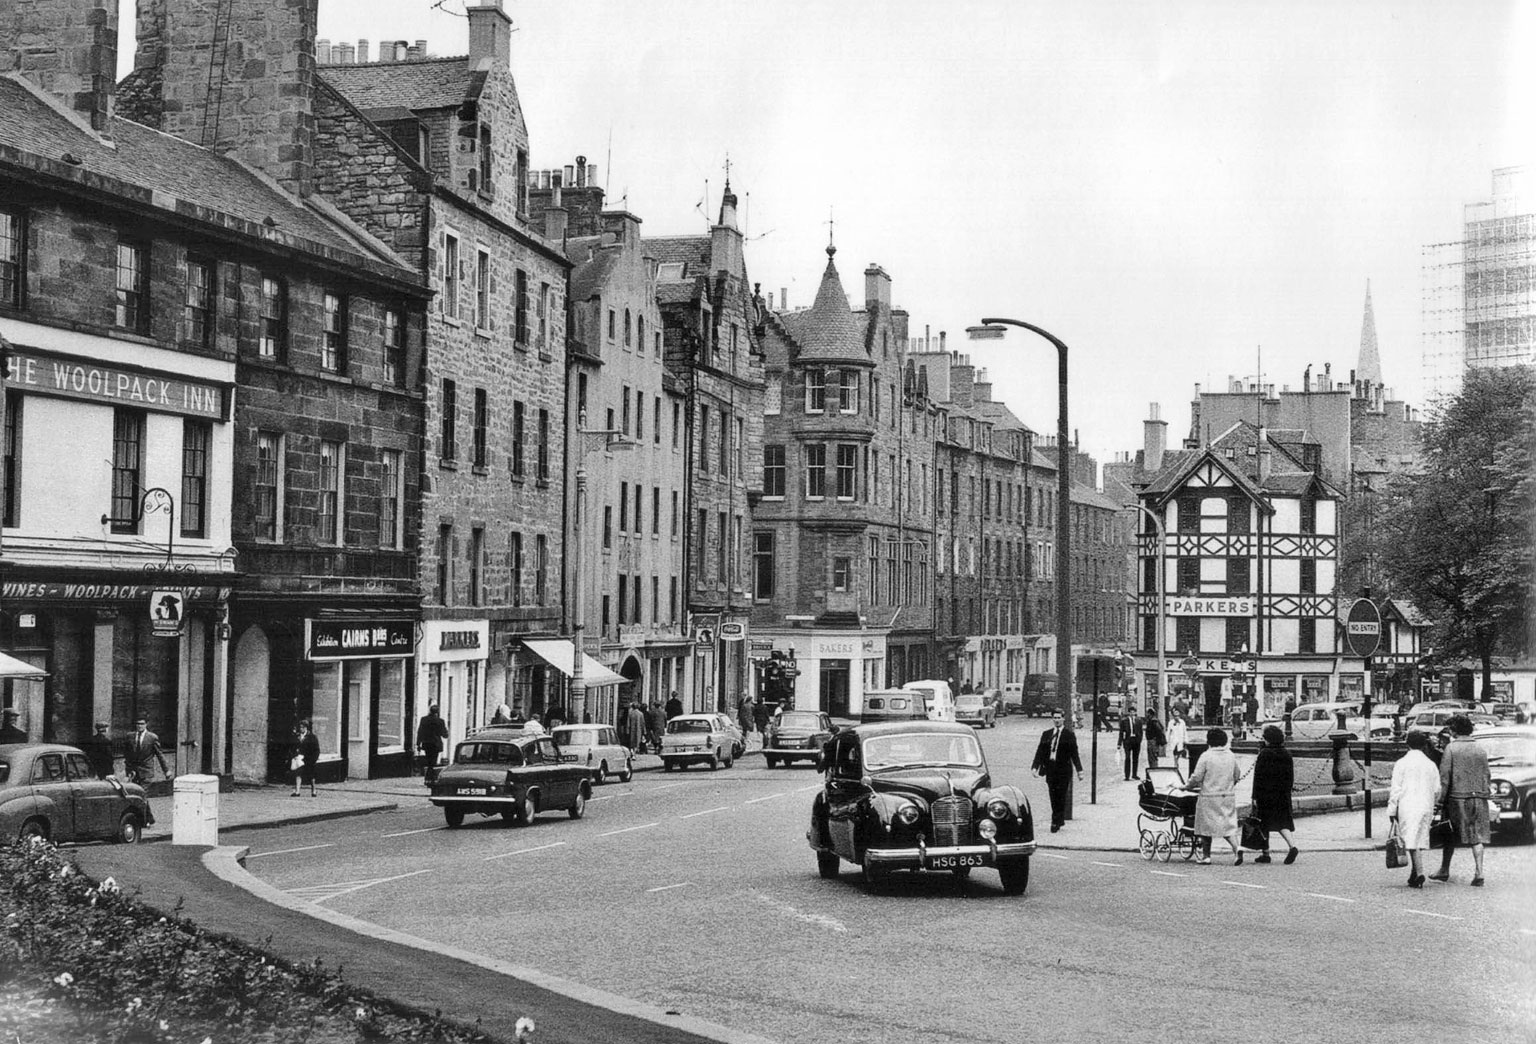 Bristo Street ares, around 1966  -  before the area was redeveloped by Edinburgh University